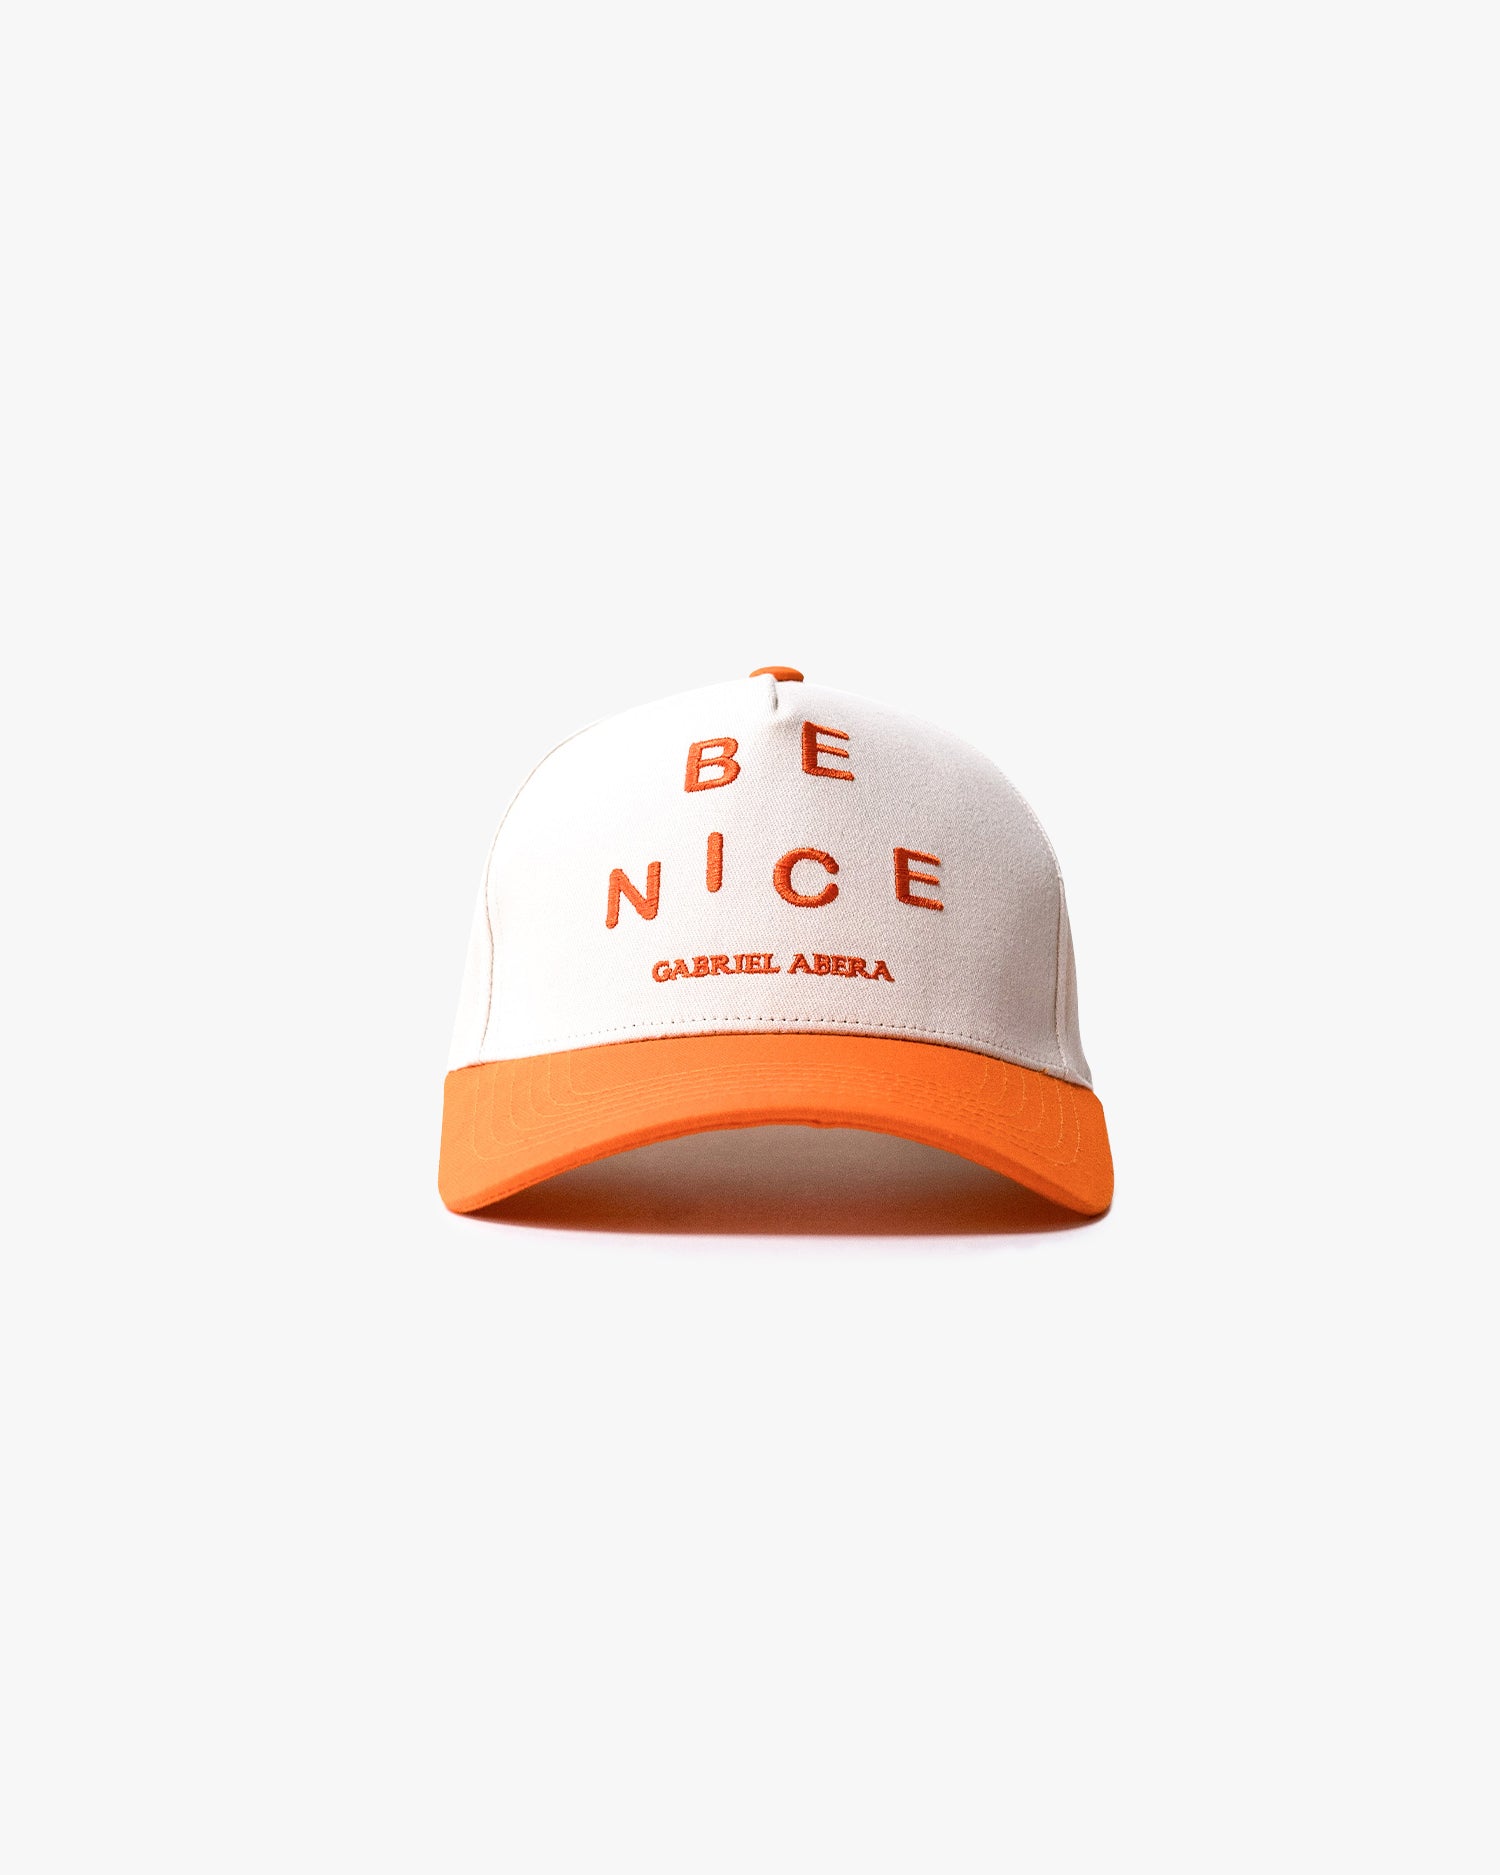 White cap with orange shield with "be nice" writing on the front